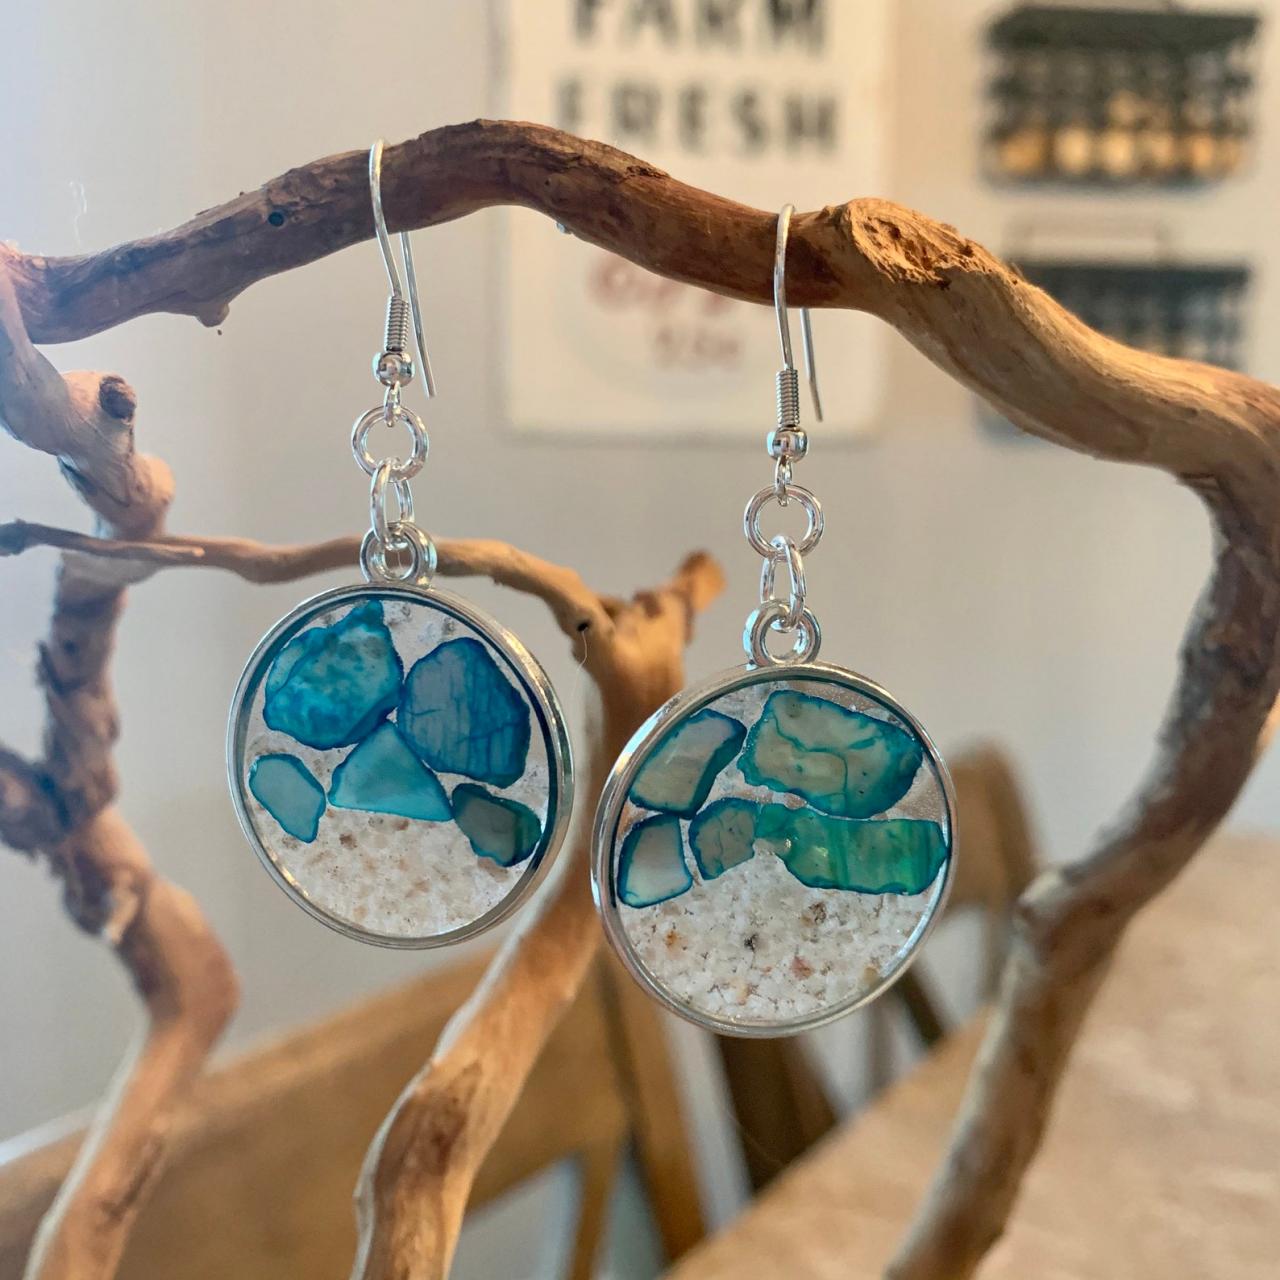 Crushed Shell Resin Earrings,shells And Sand,beach Jewelry, Jewelry For Women,summer Earrings,wave Earrings,nature,natural Jewelry,boho,gift